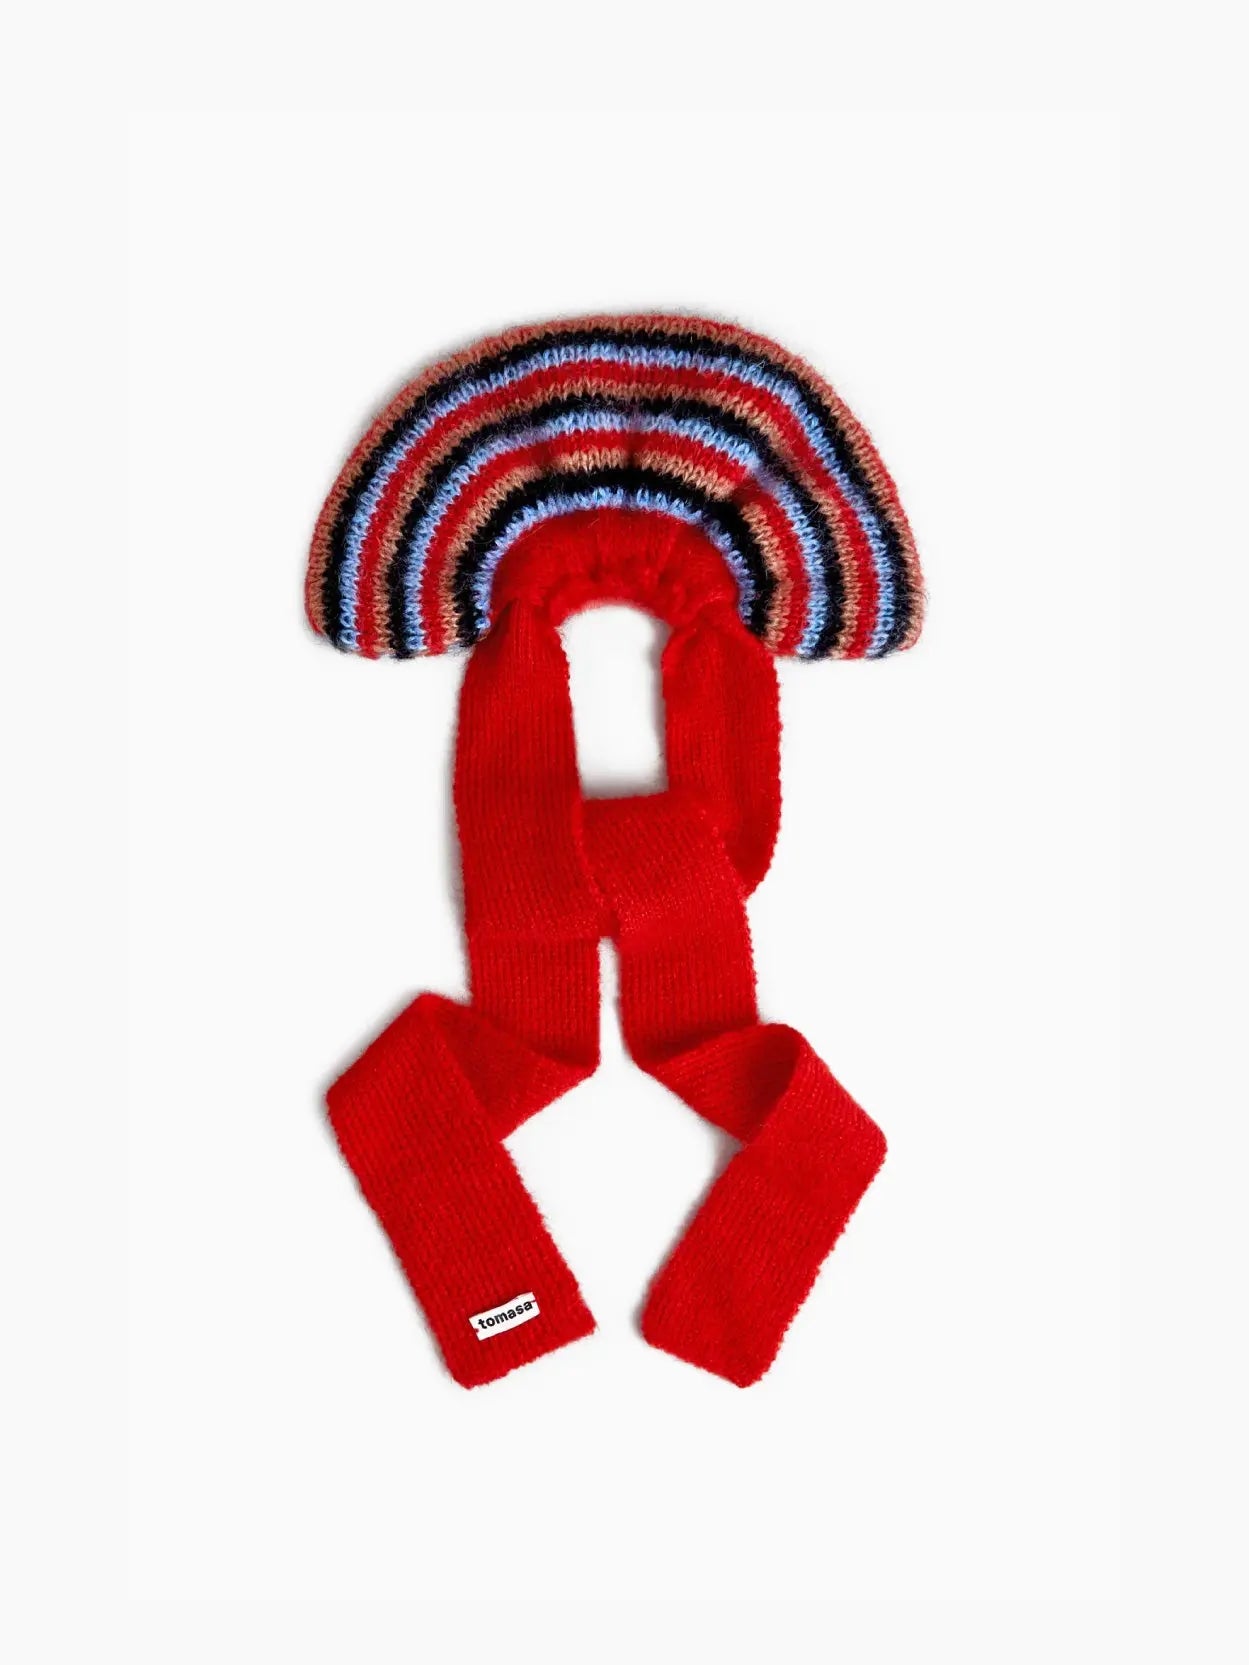 A colorful Serena Bow Scrunchie with a curved section featuring blue, white, red, and black stripes, and two long, bright red tails. A small label from Tomasa is visible on one of the red tails. The background is plain white.